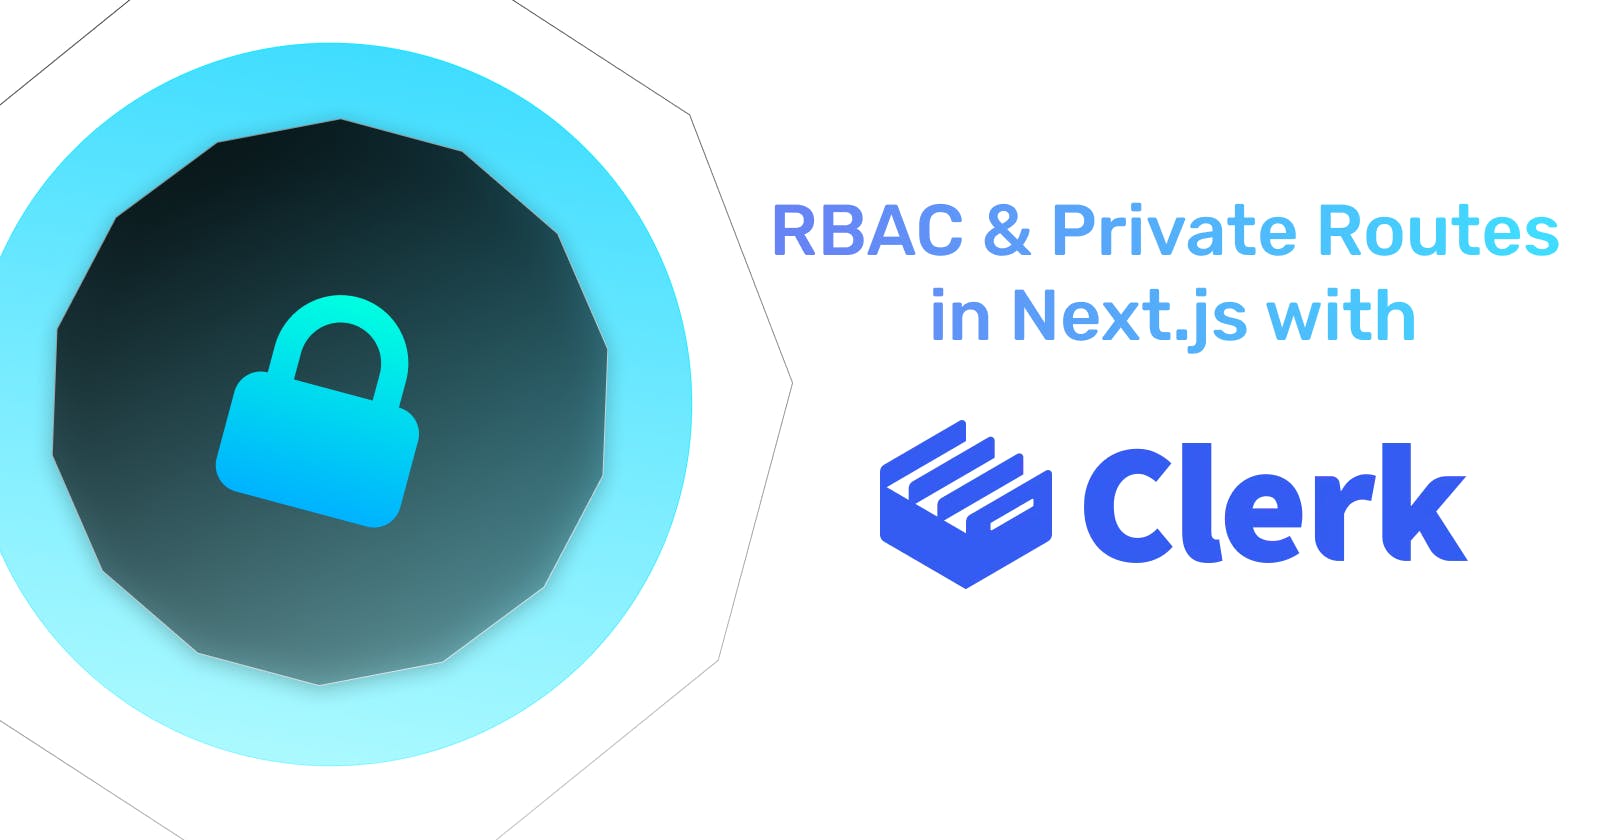 RBAC & Private Routes in Next.js with Clerk using NextShield.